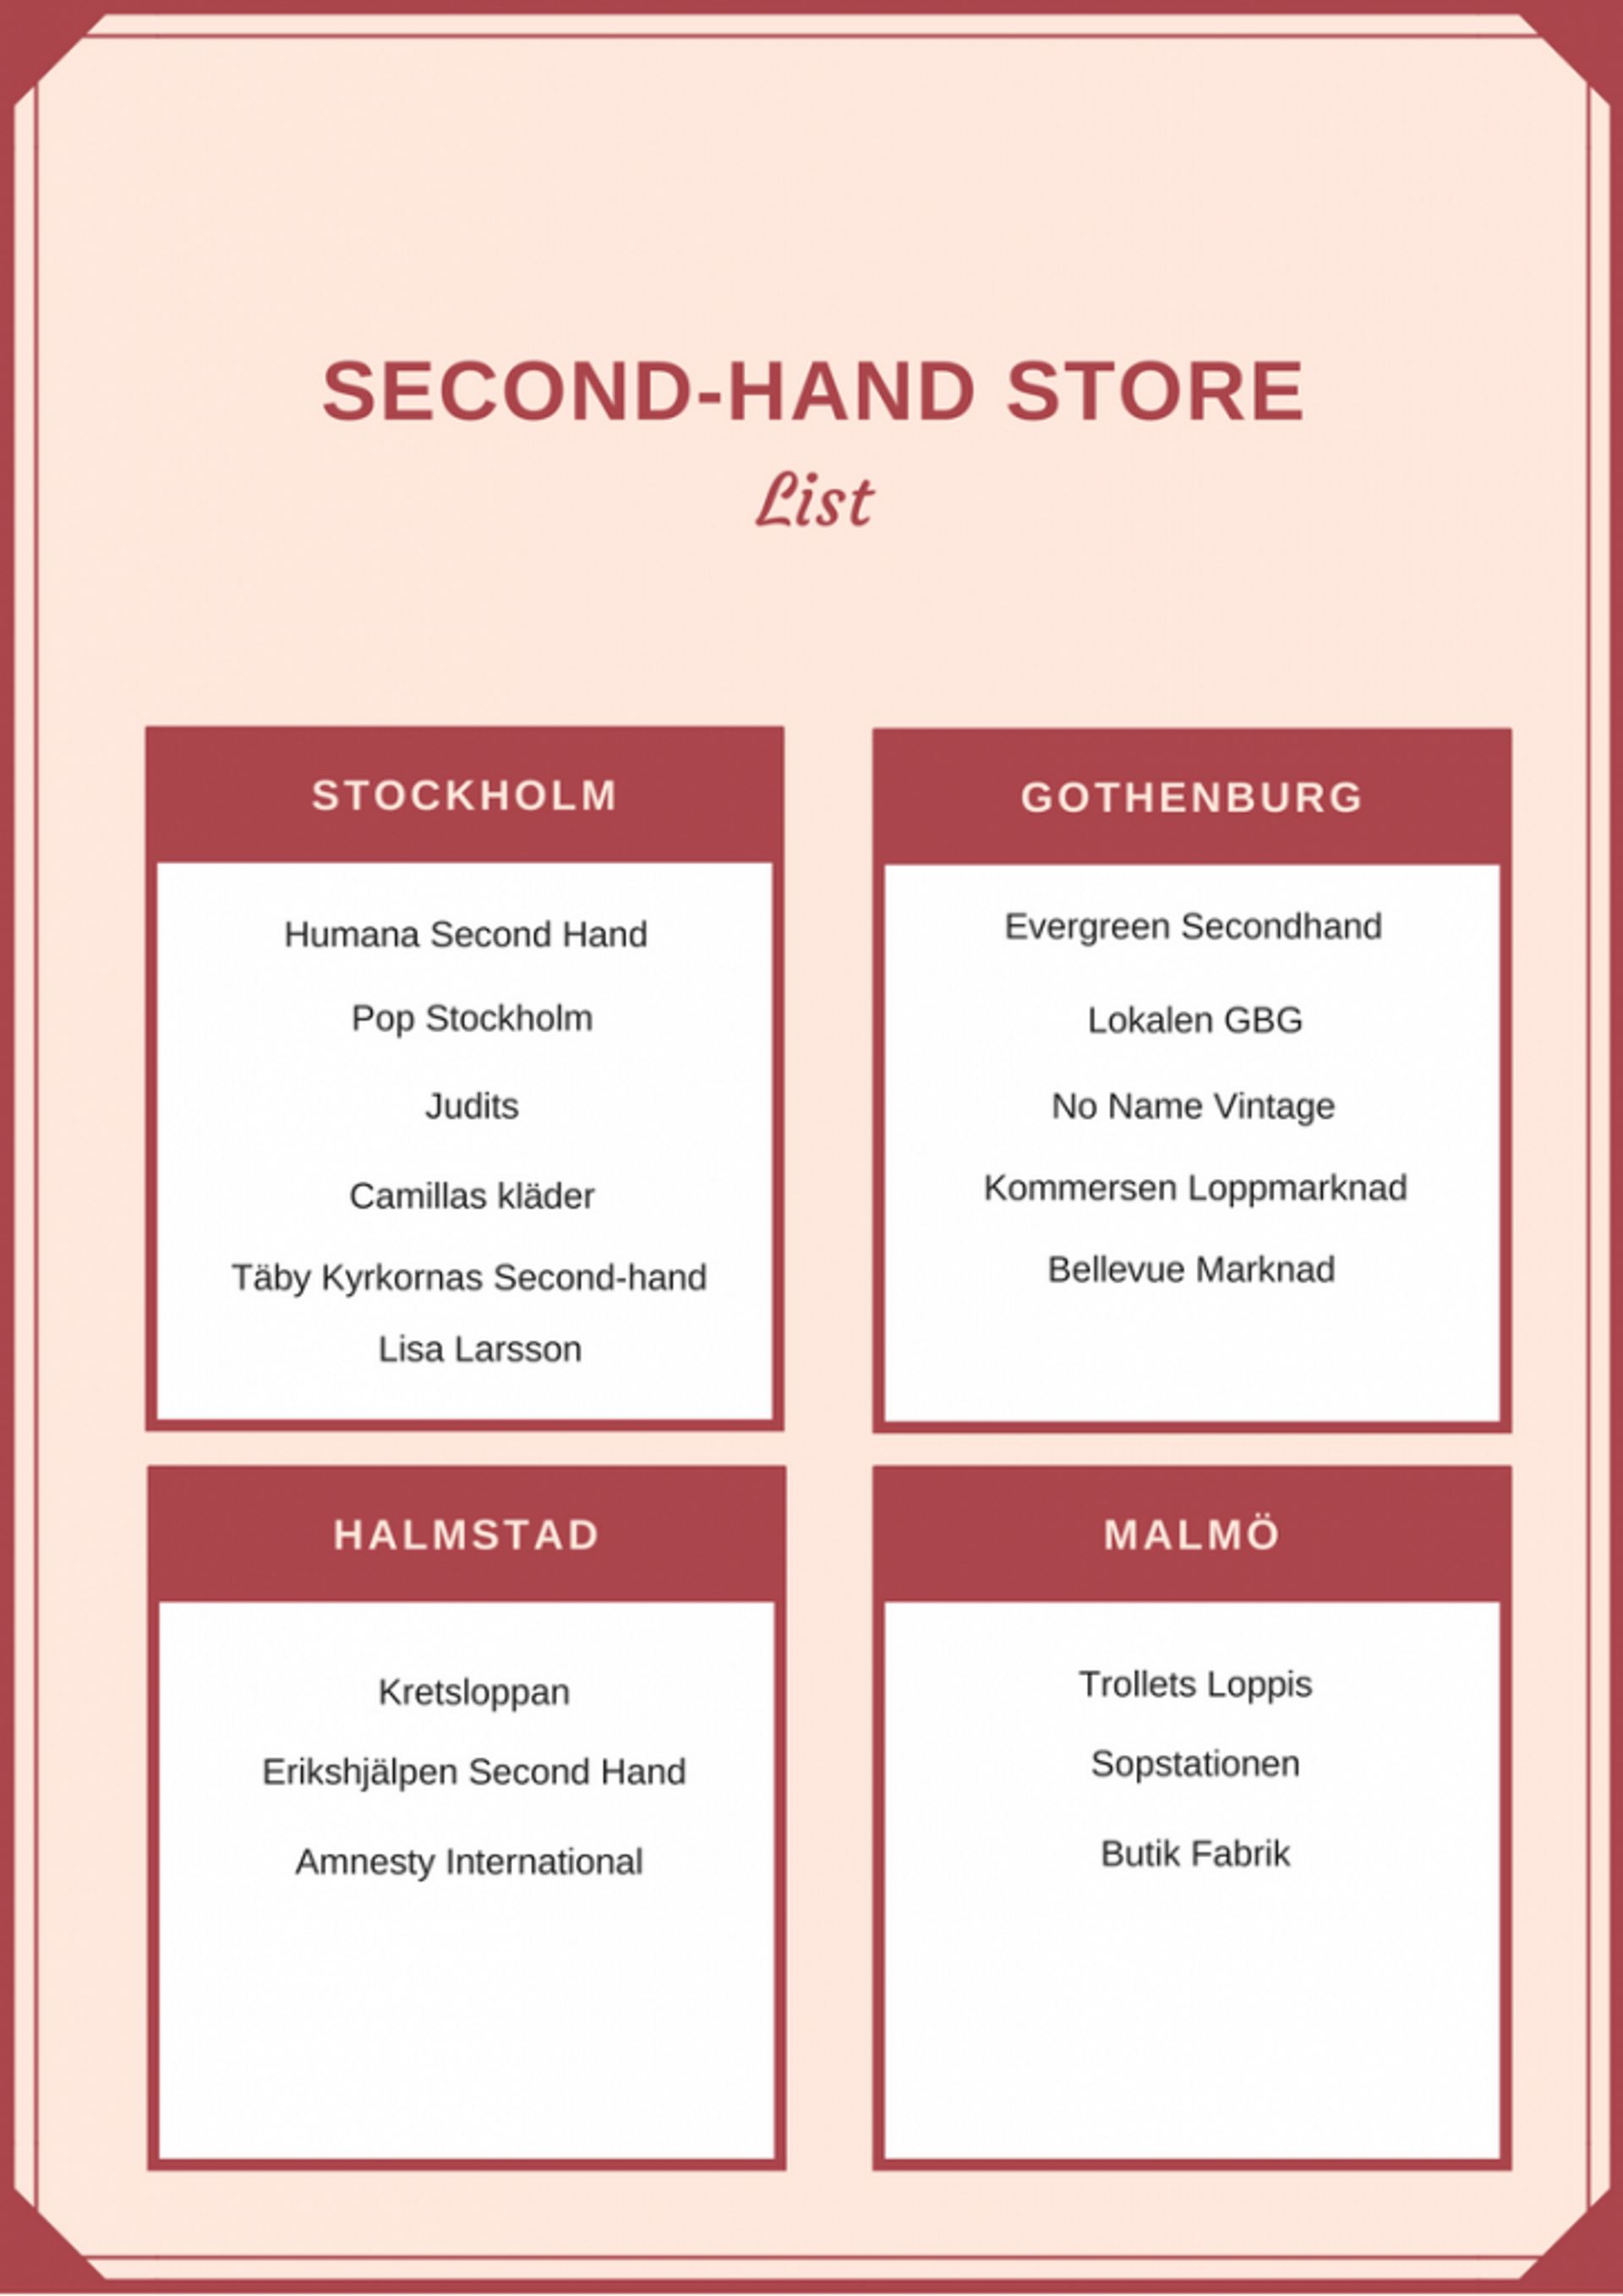 Illustration with a list of second-hand shops.